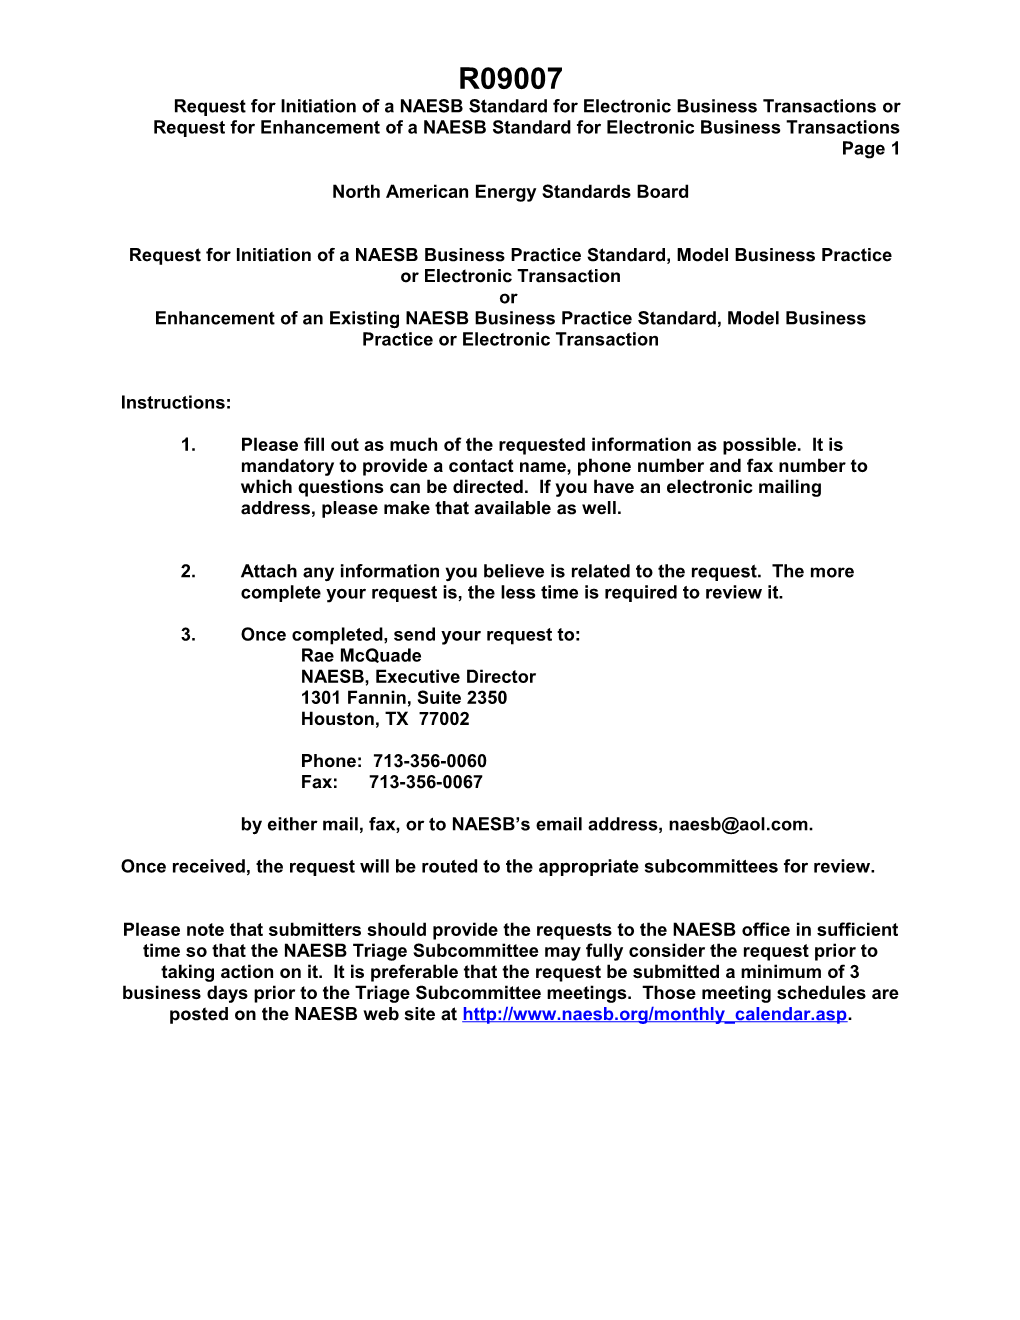 North American Energy Standards Board s19